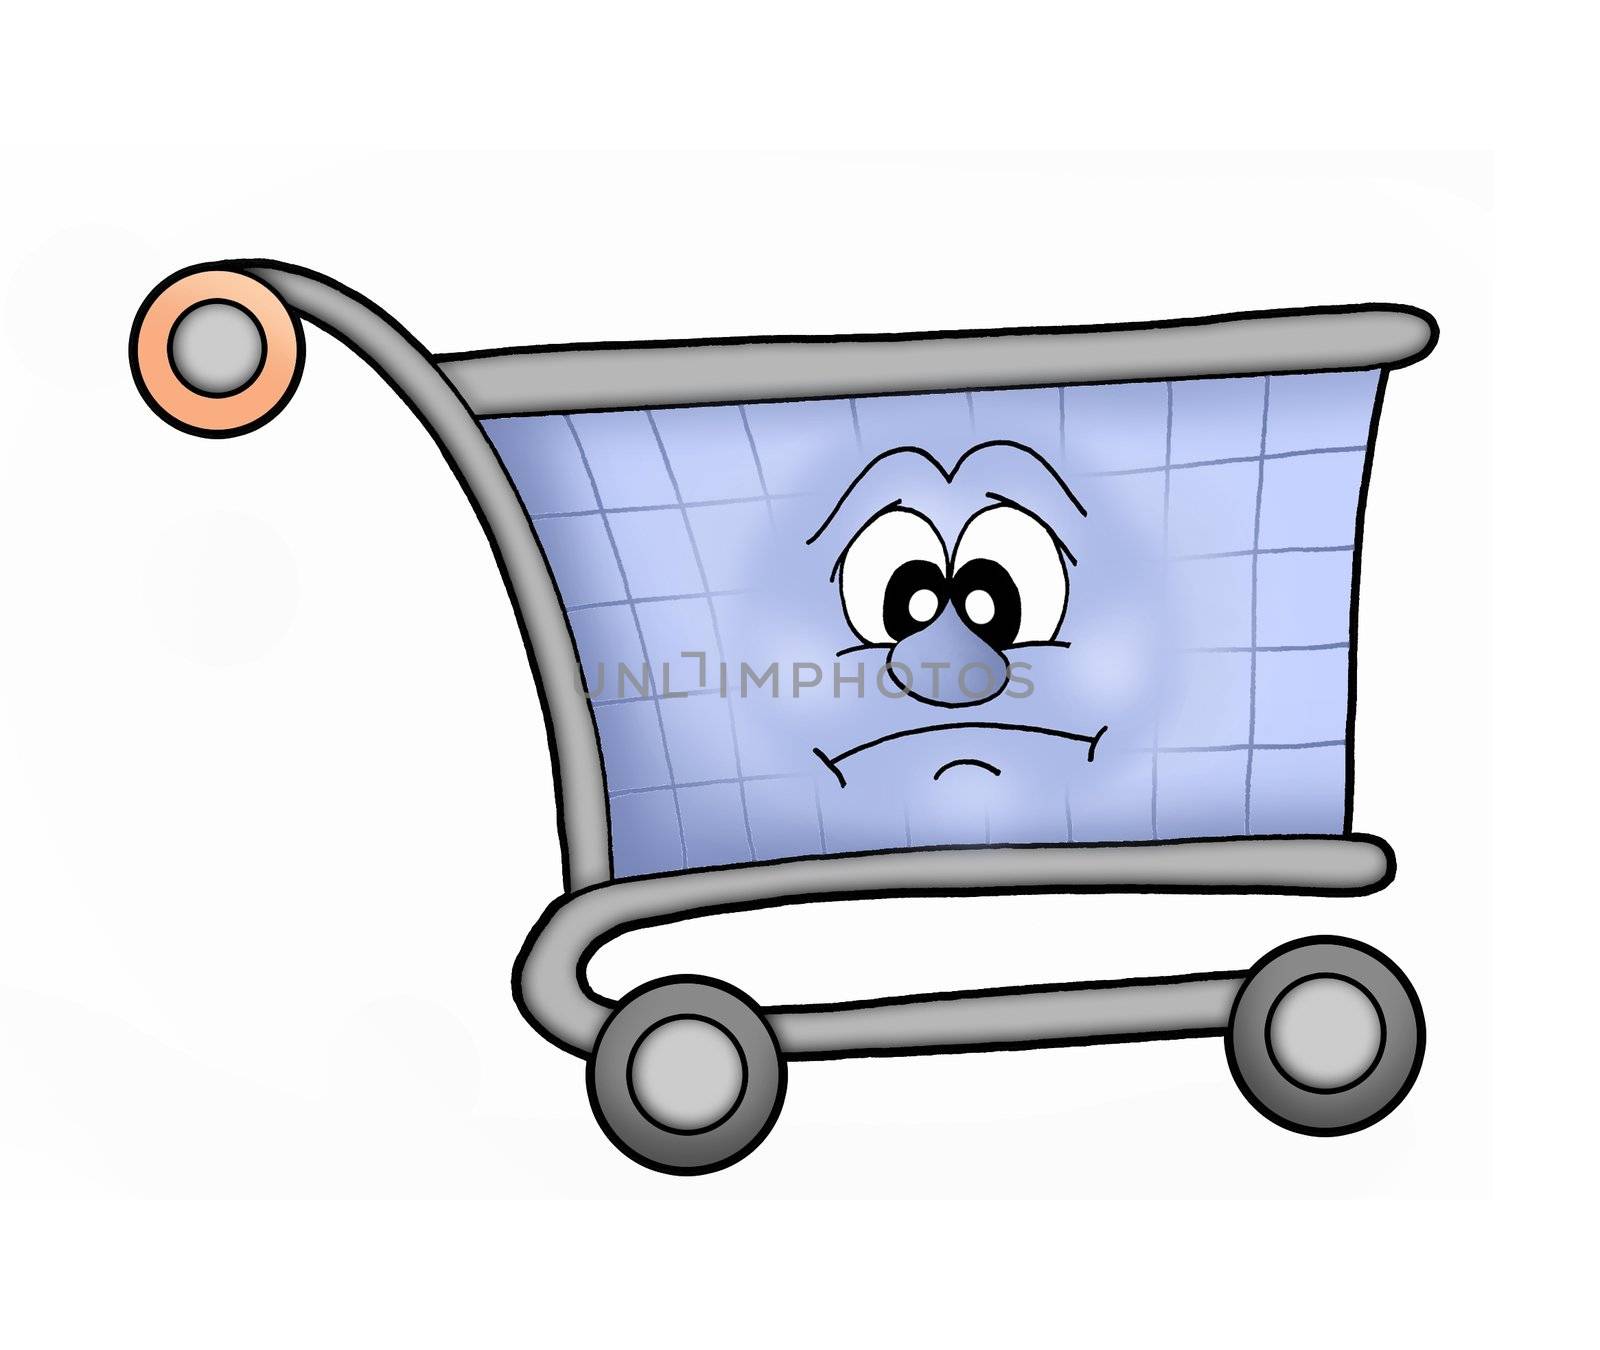 Shoping cart sad by clairev